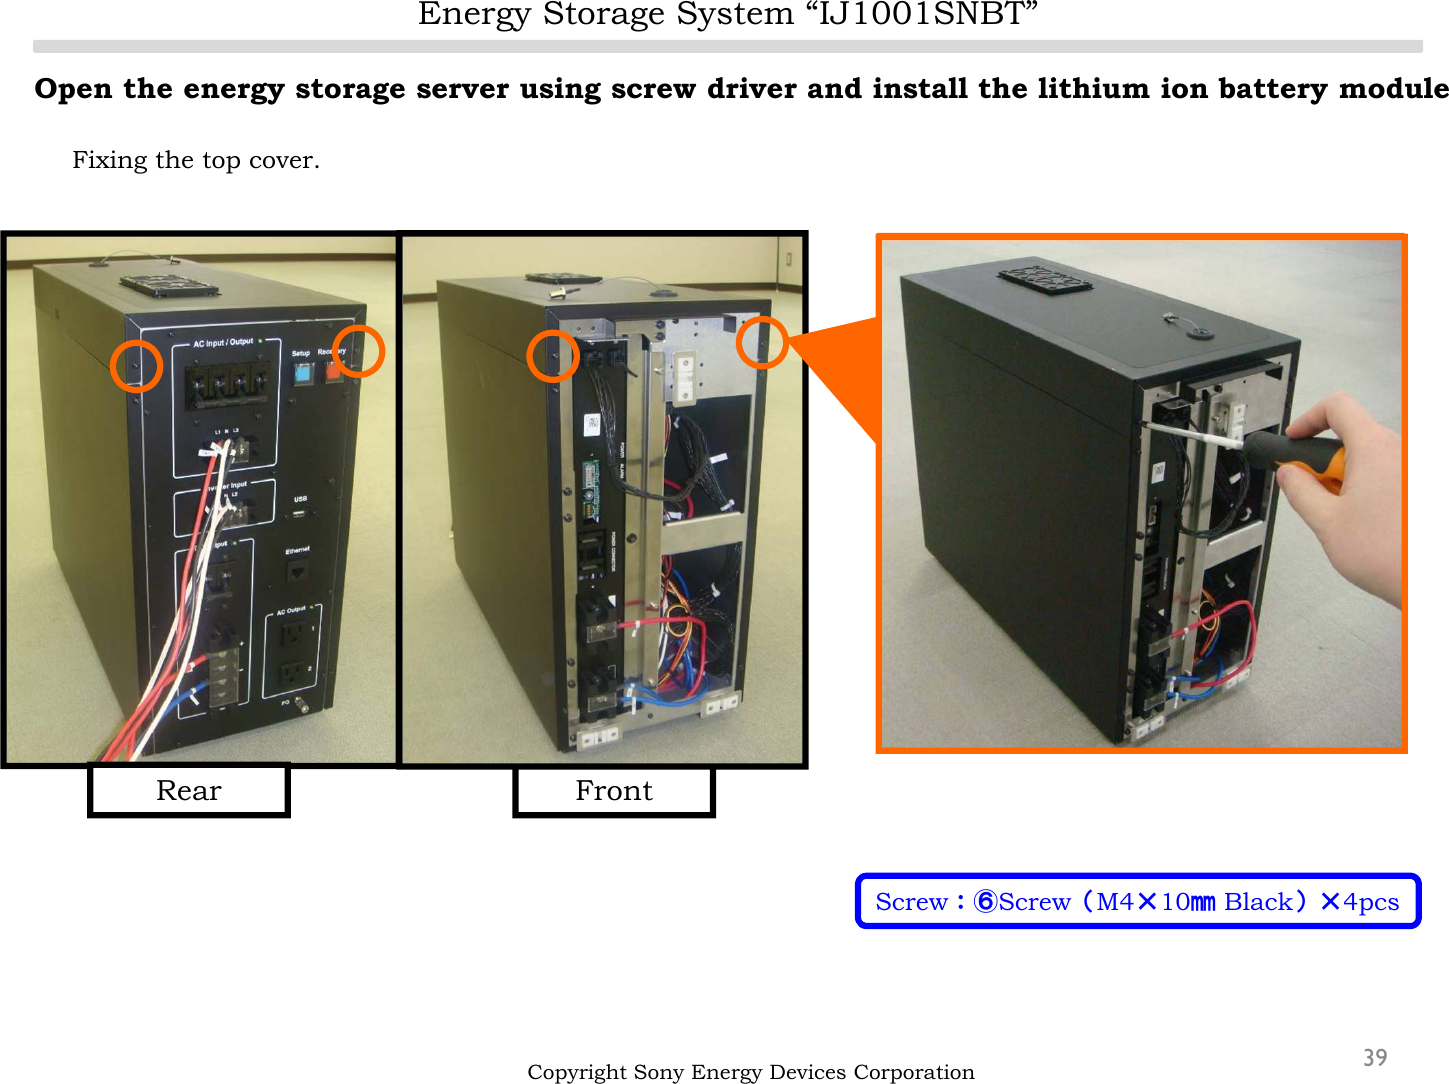 FrontEnergy Storage System “IJ1001SNBT”39Open the energy storage server using screw driver and install the lithium ion battery moduleFixing the top cover.Copyright Sony Energy Devices CorporationScrew：⑥Screw（M4×10㎜Black）×4pcsRear